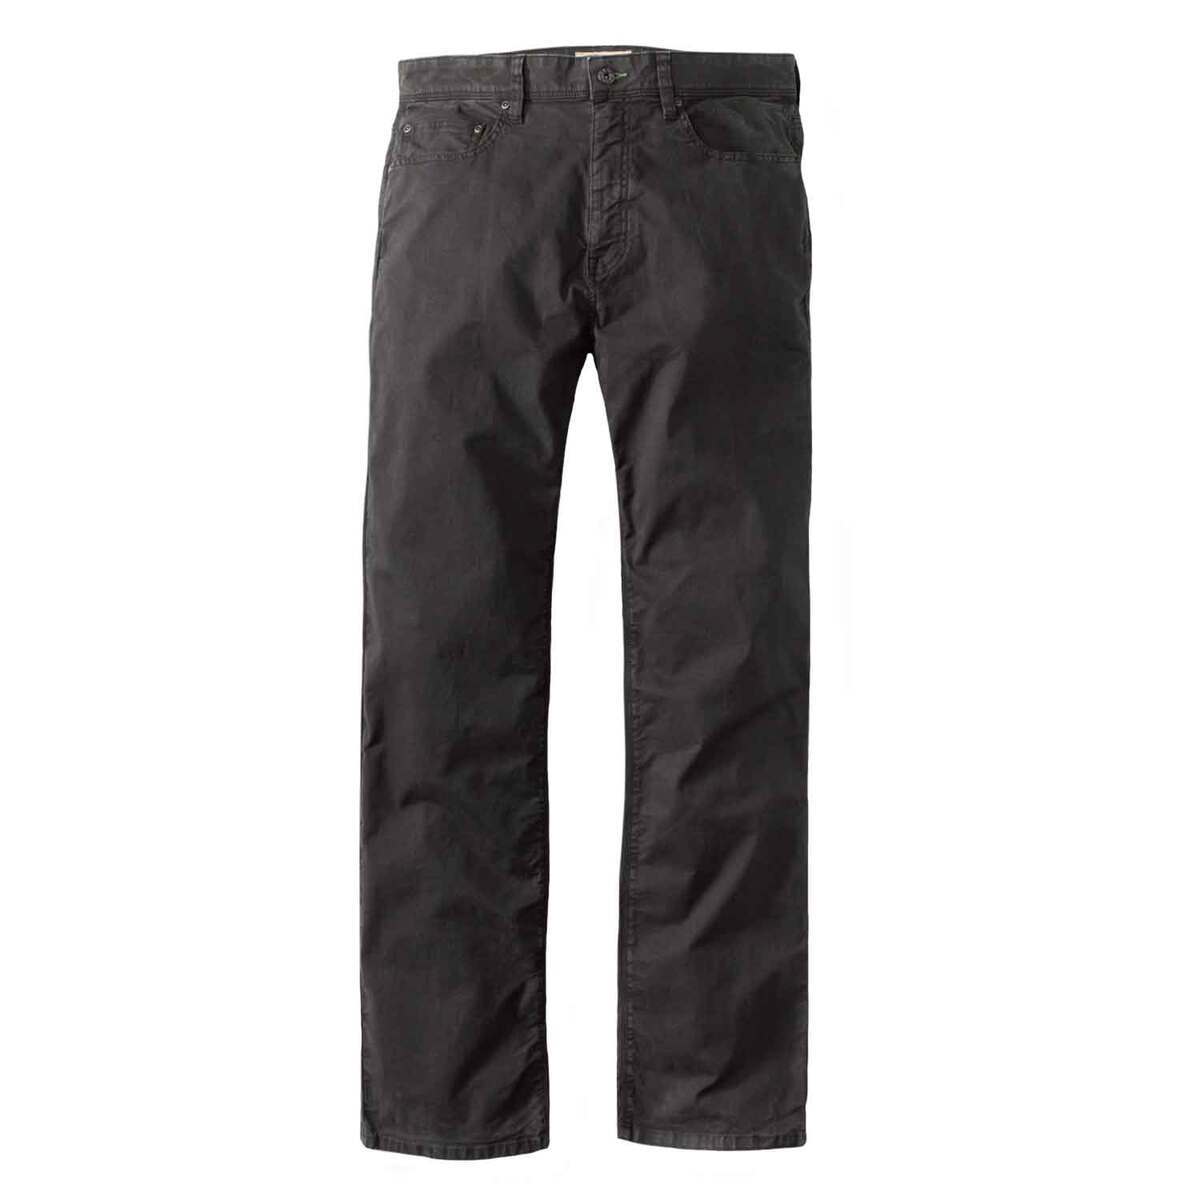 Orvis Spandex Casual Pants for Men